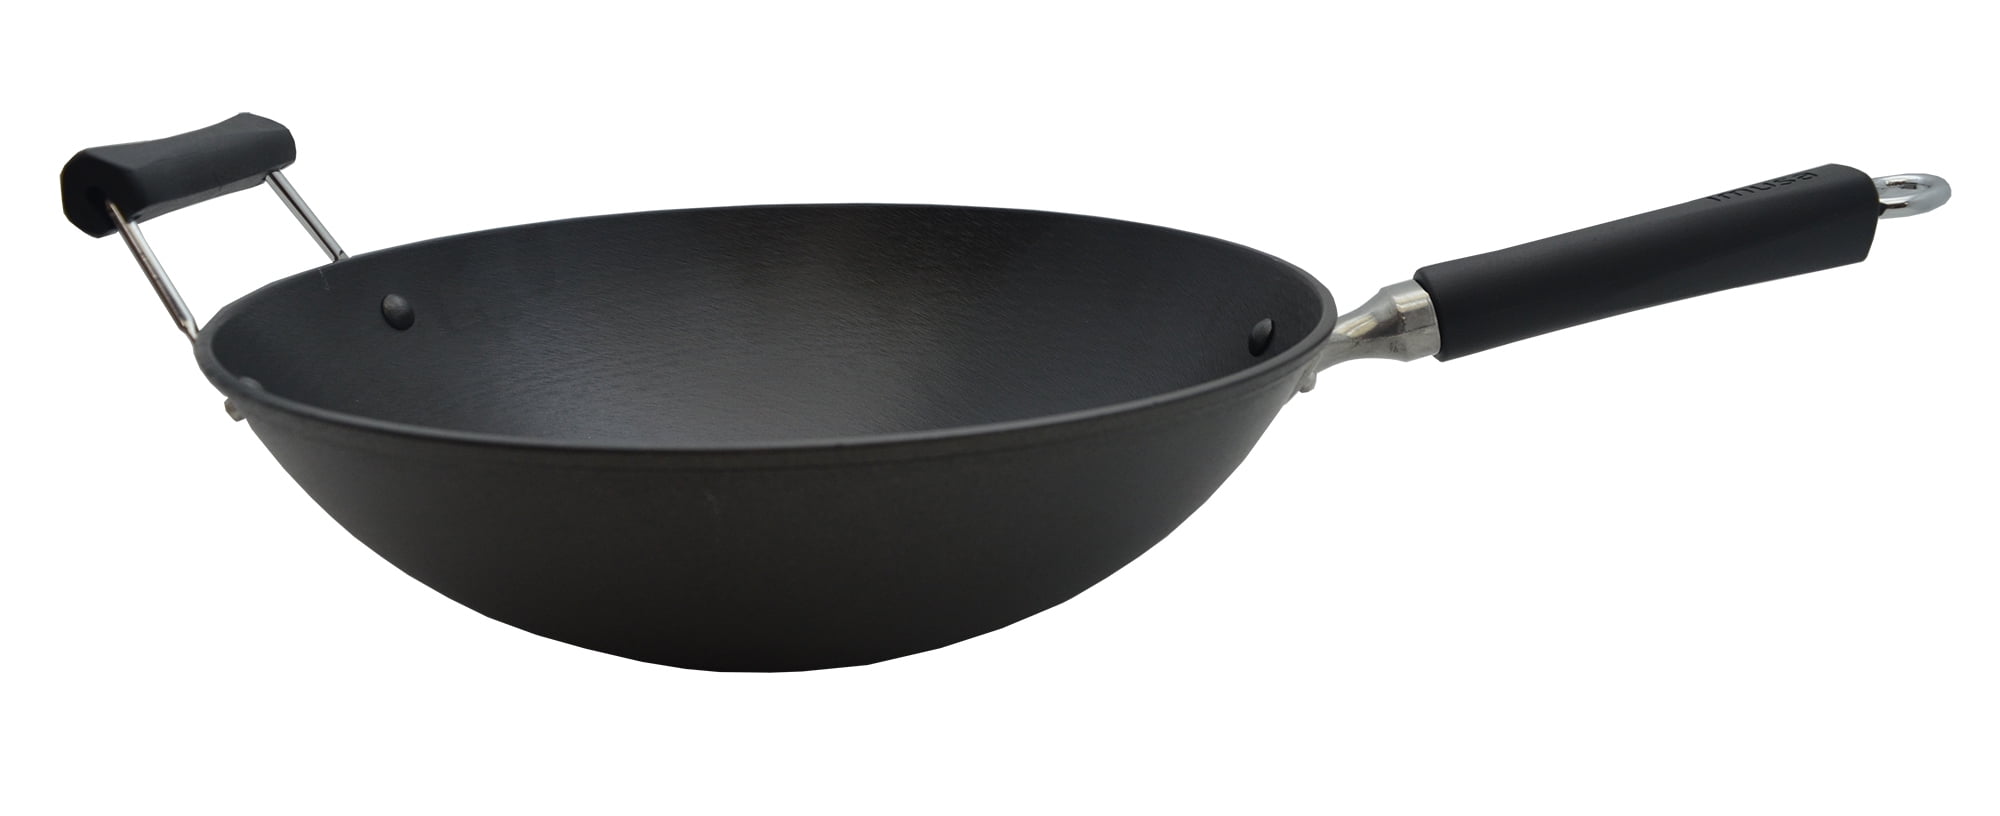 Imusa 14 inch Light Cast Iron Pre Seasoned Traditional Wok with Handle